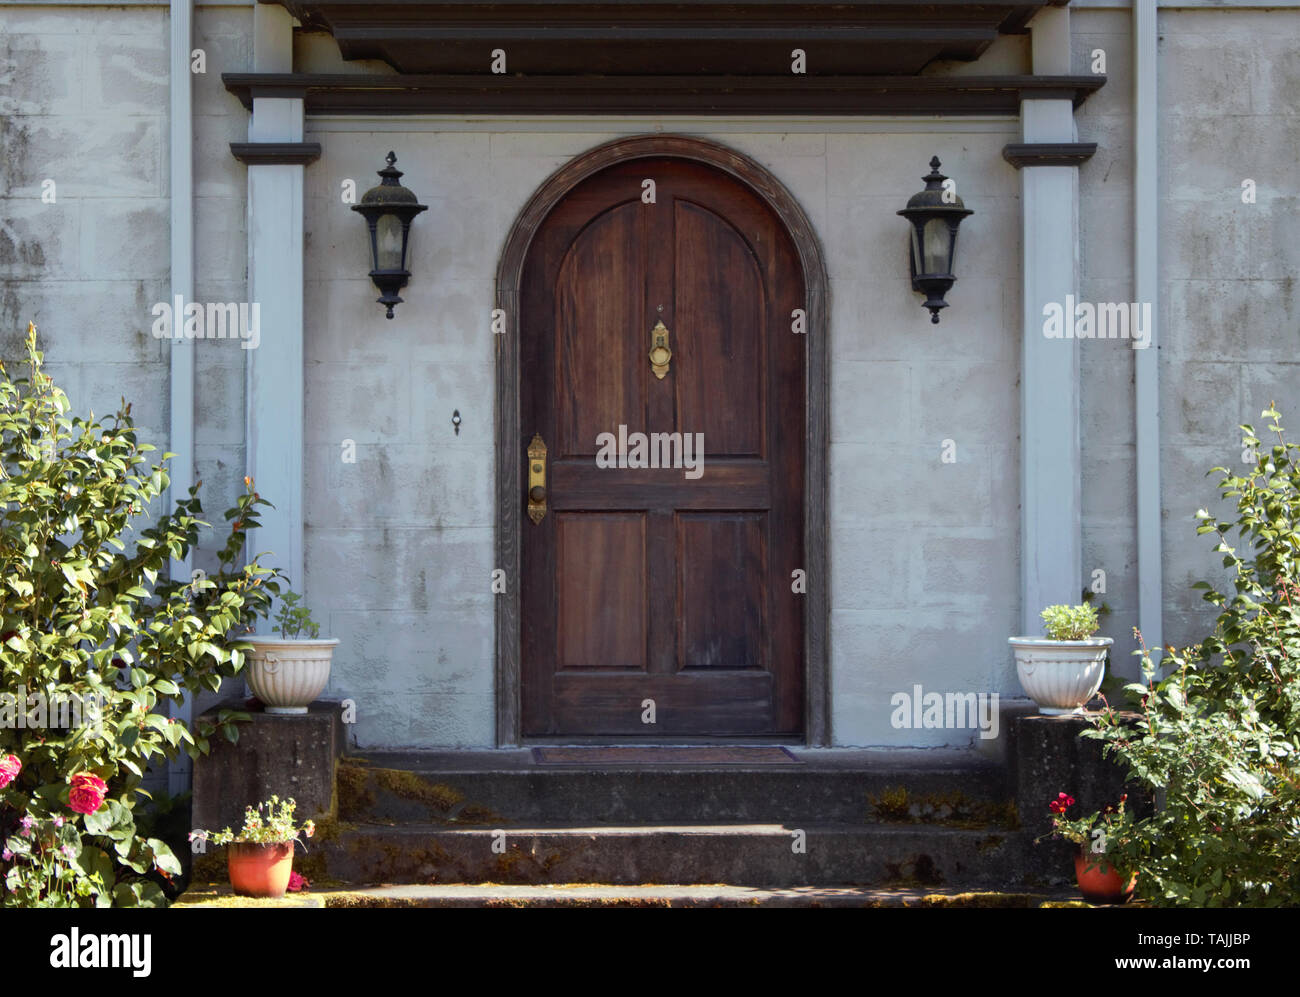 Arched doorway to a stately manor. Stock Photo